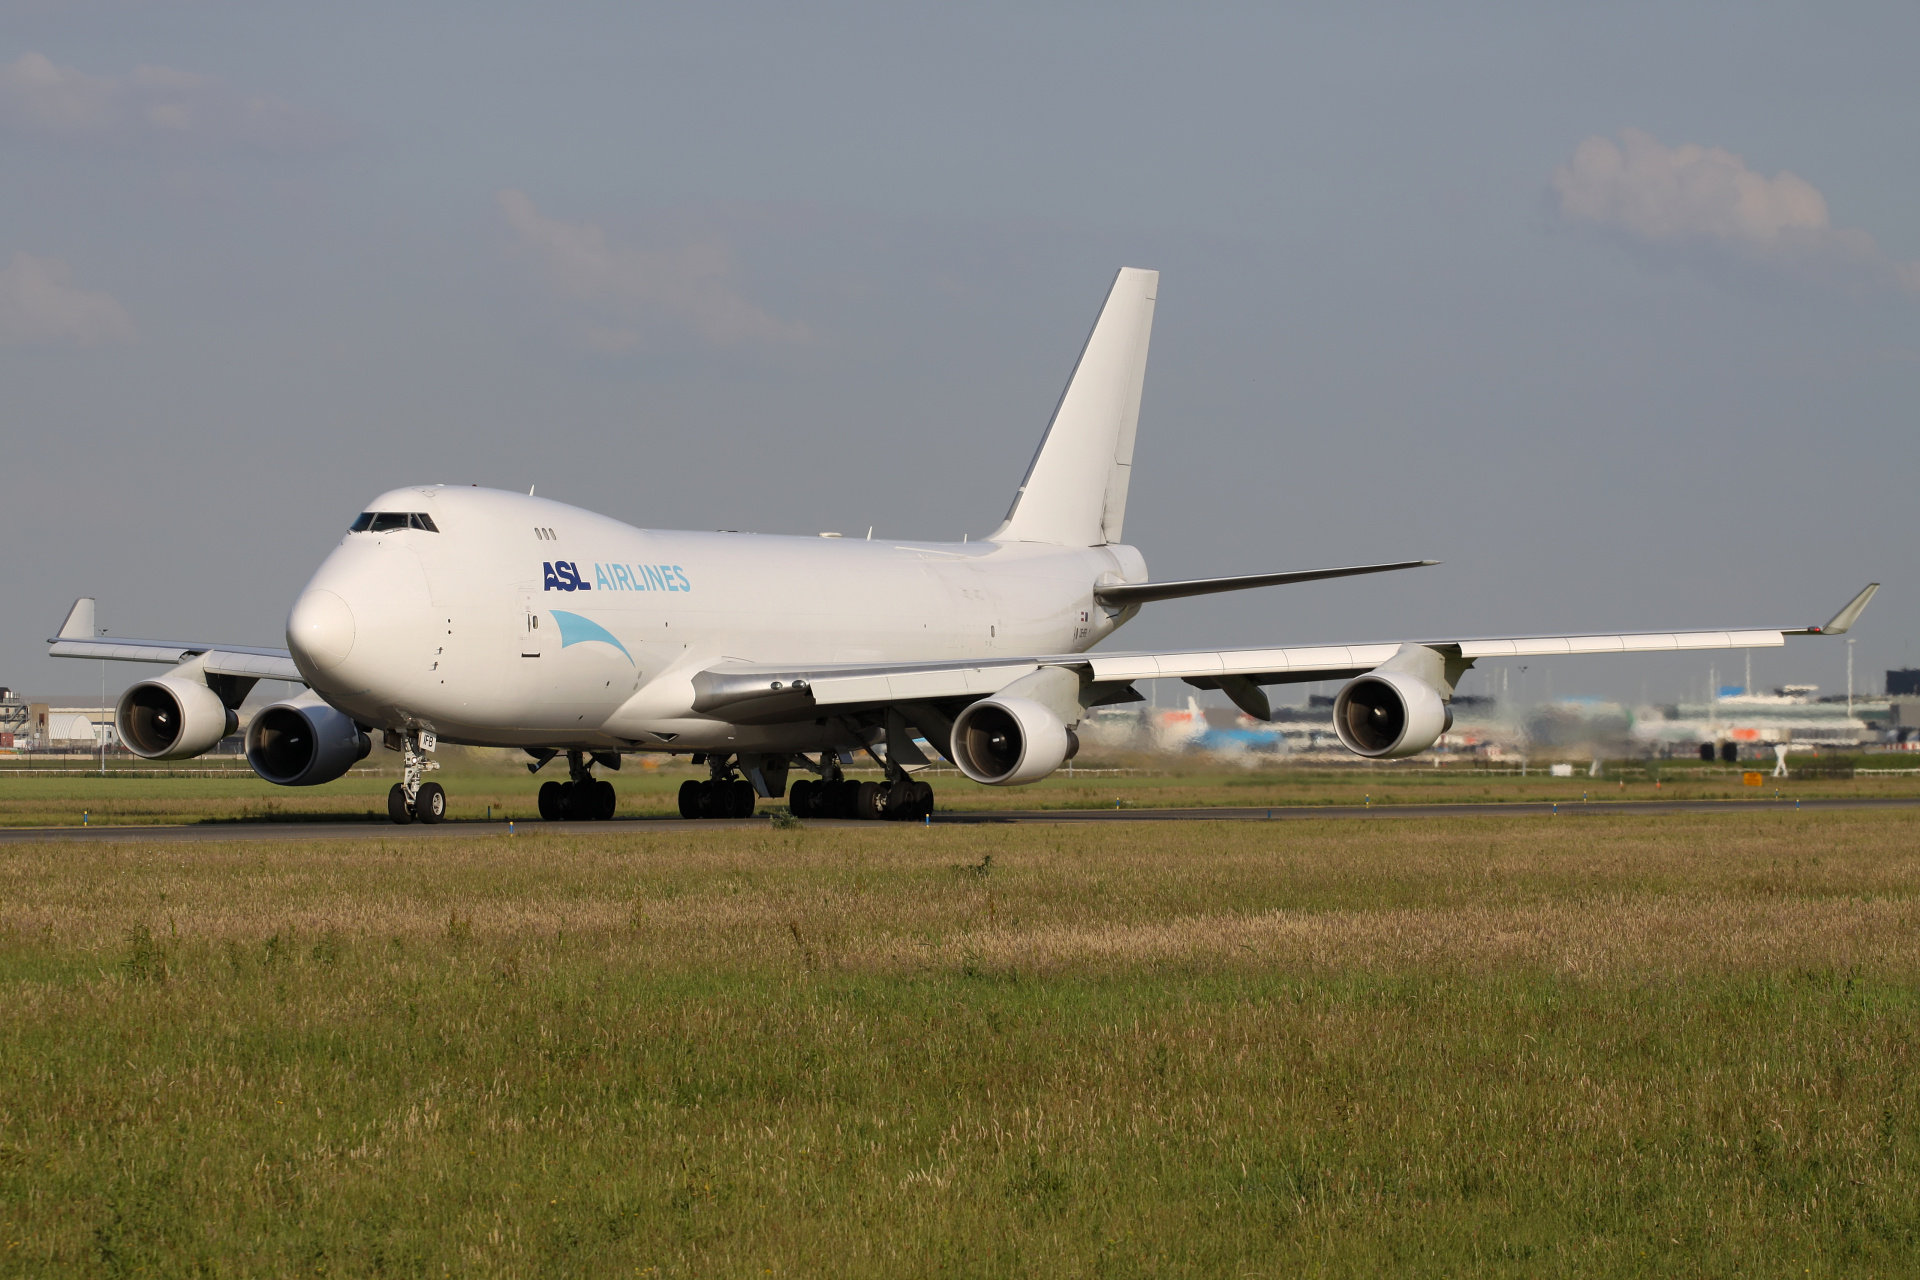 OE-IFB, ASL Airlines Belgium (Samoloty » Spotting na Schiphol » Boeing 747-400F)